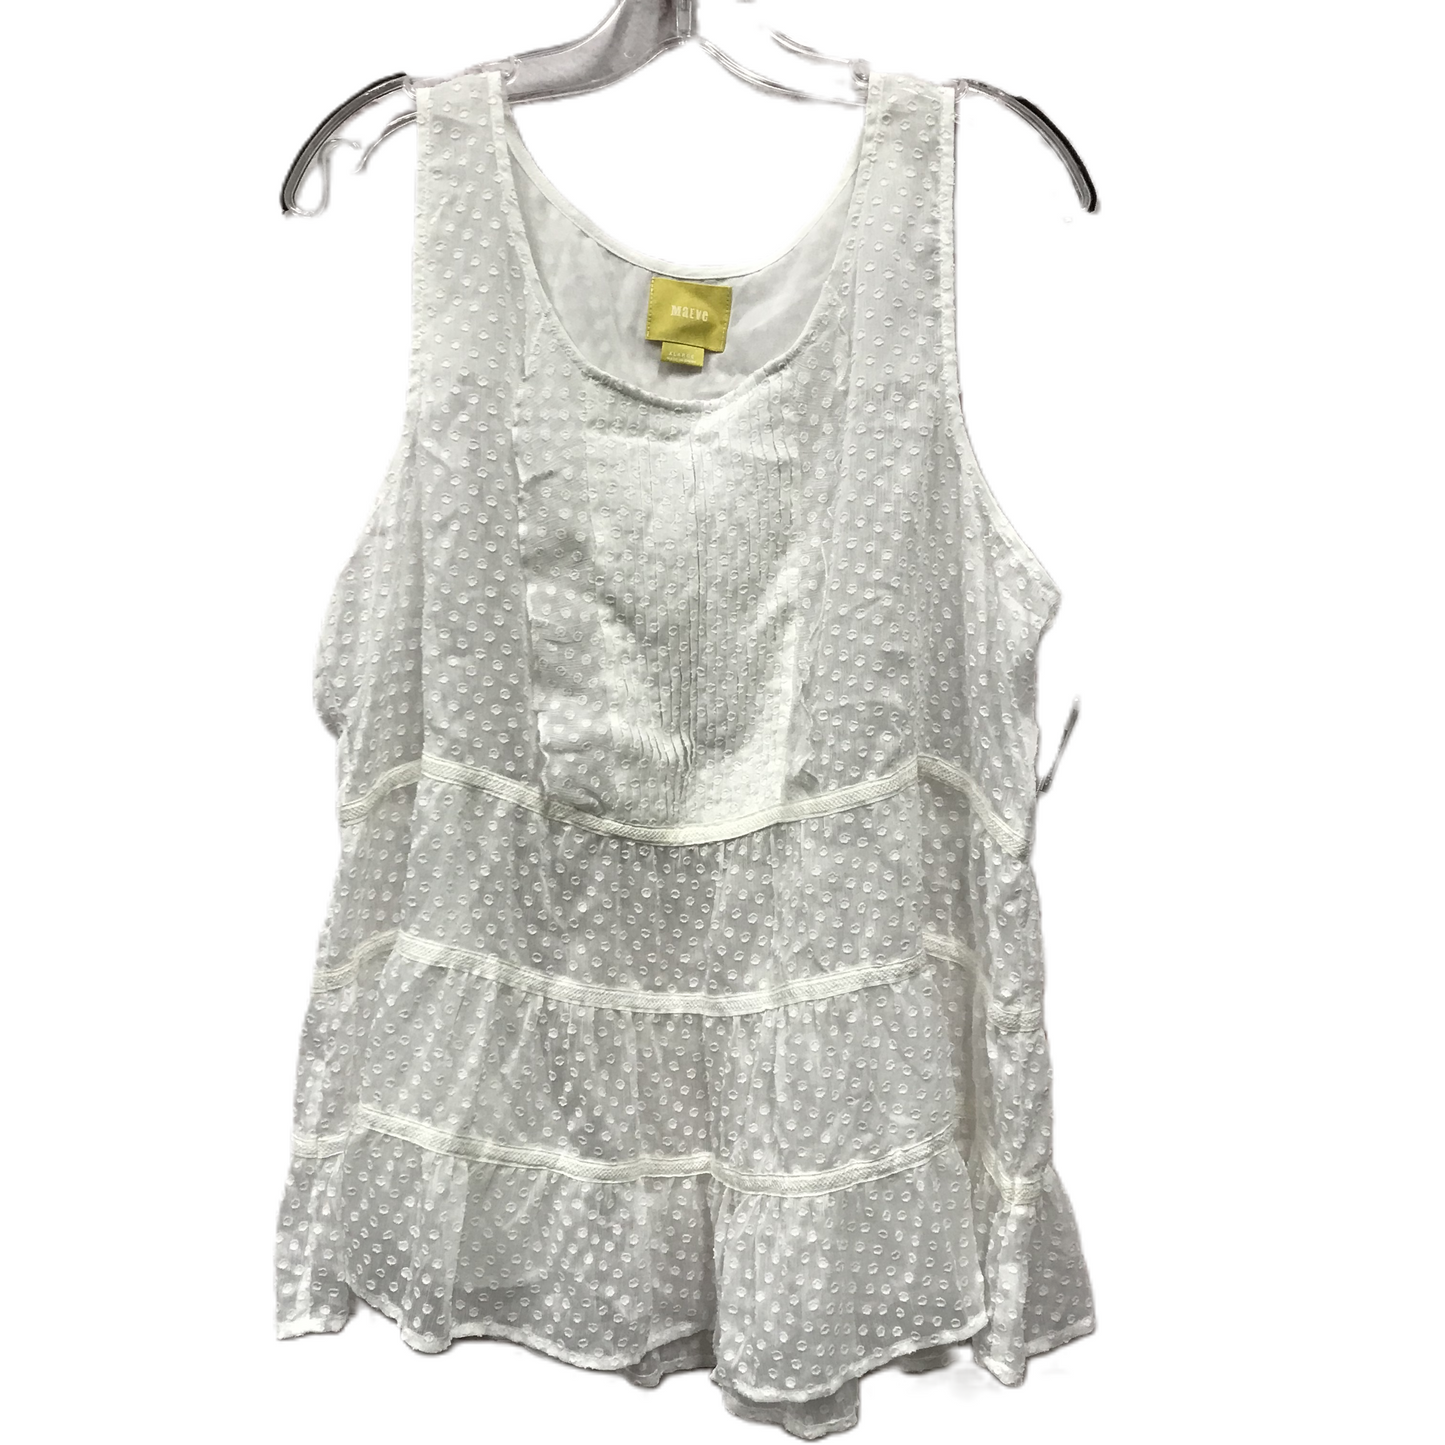 White Top Sleeveless By Maeve, Size: Xl